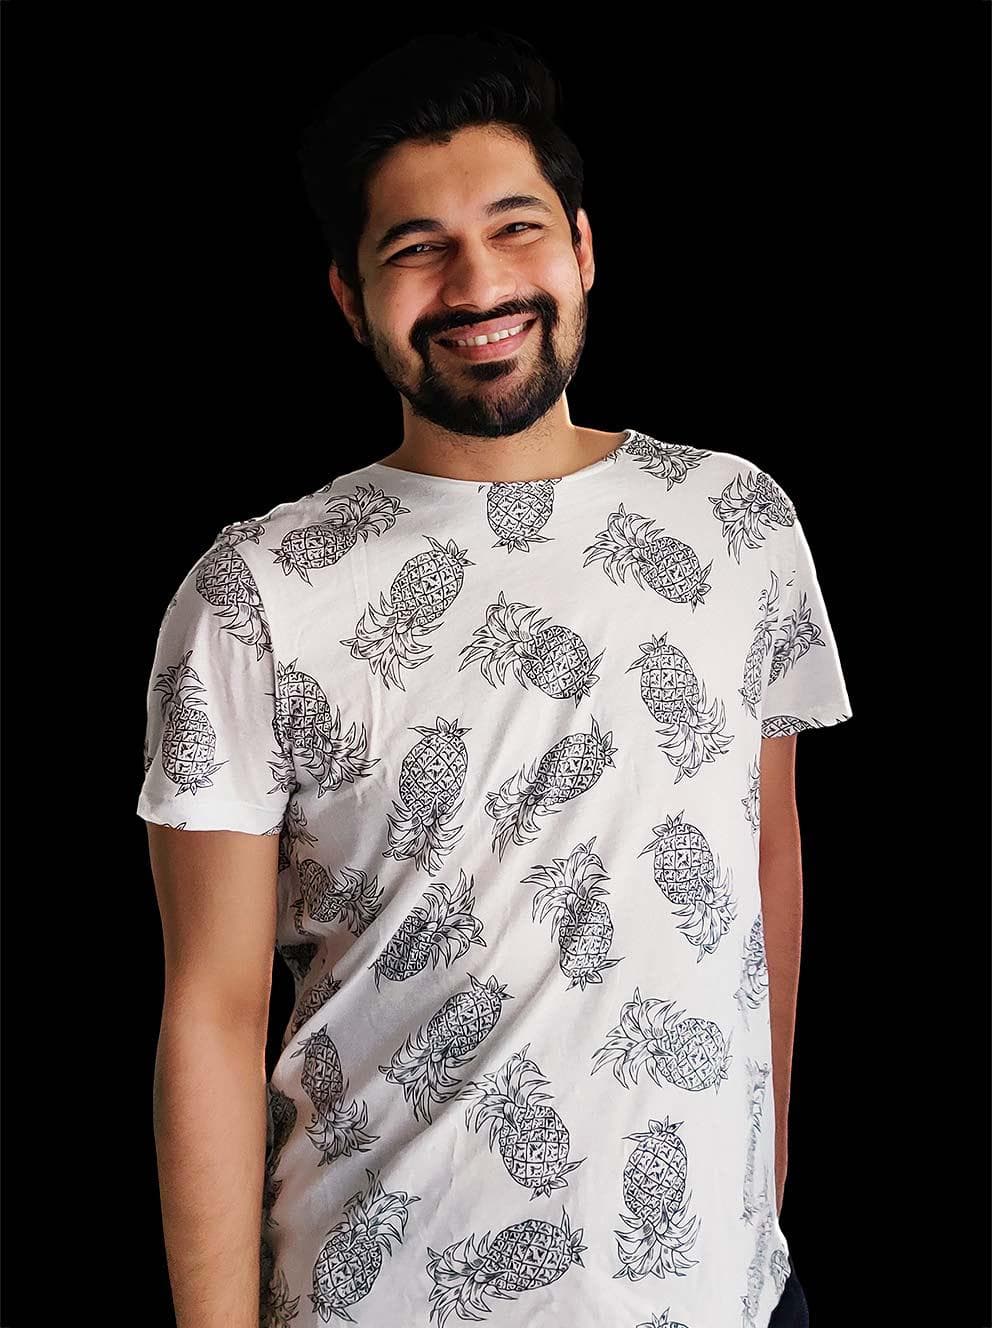 Ganesh Chandrashekar, who is wearing a white t-shirt covered with drawings of black-and-white pineapples, and is standing with his hands at his sides while smiling big